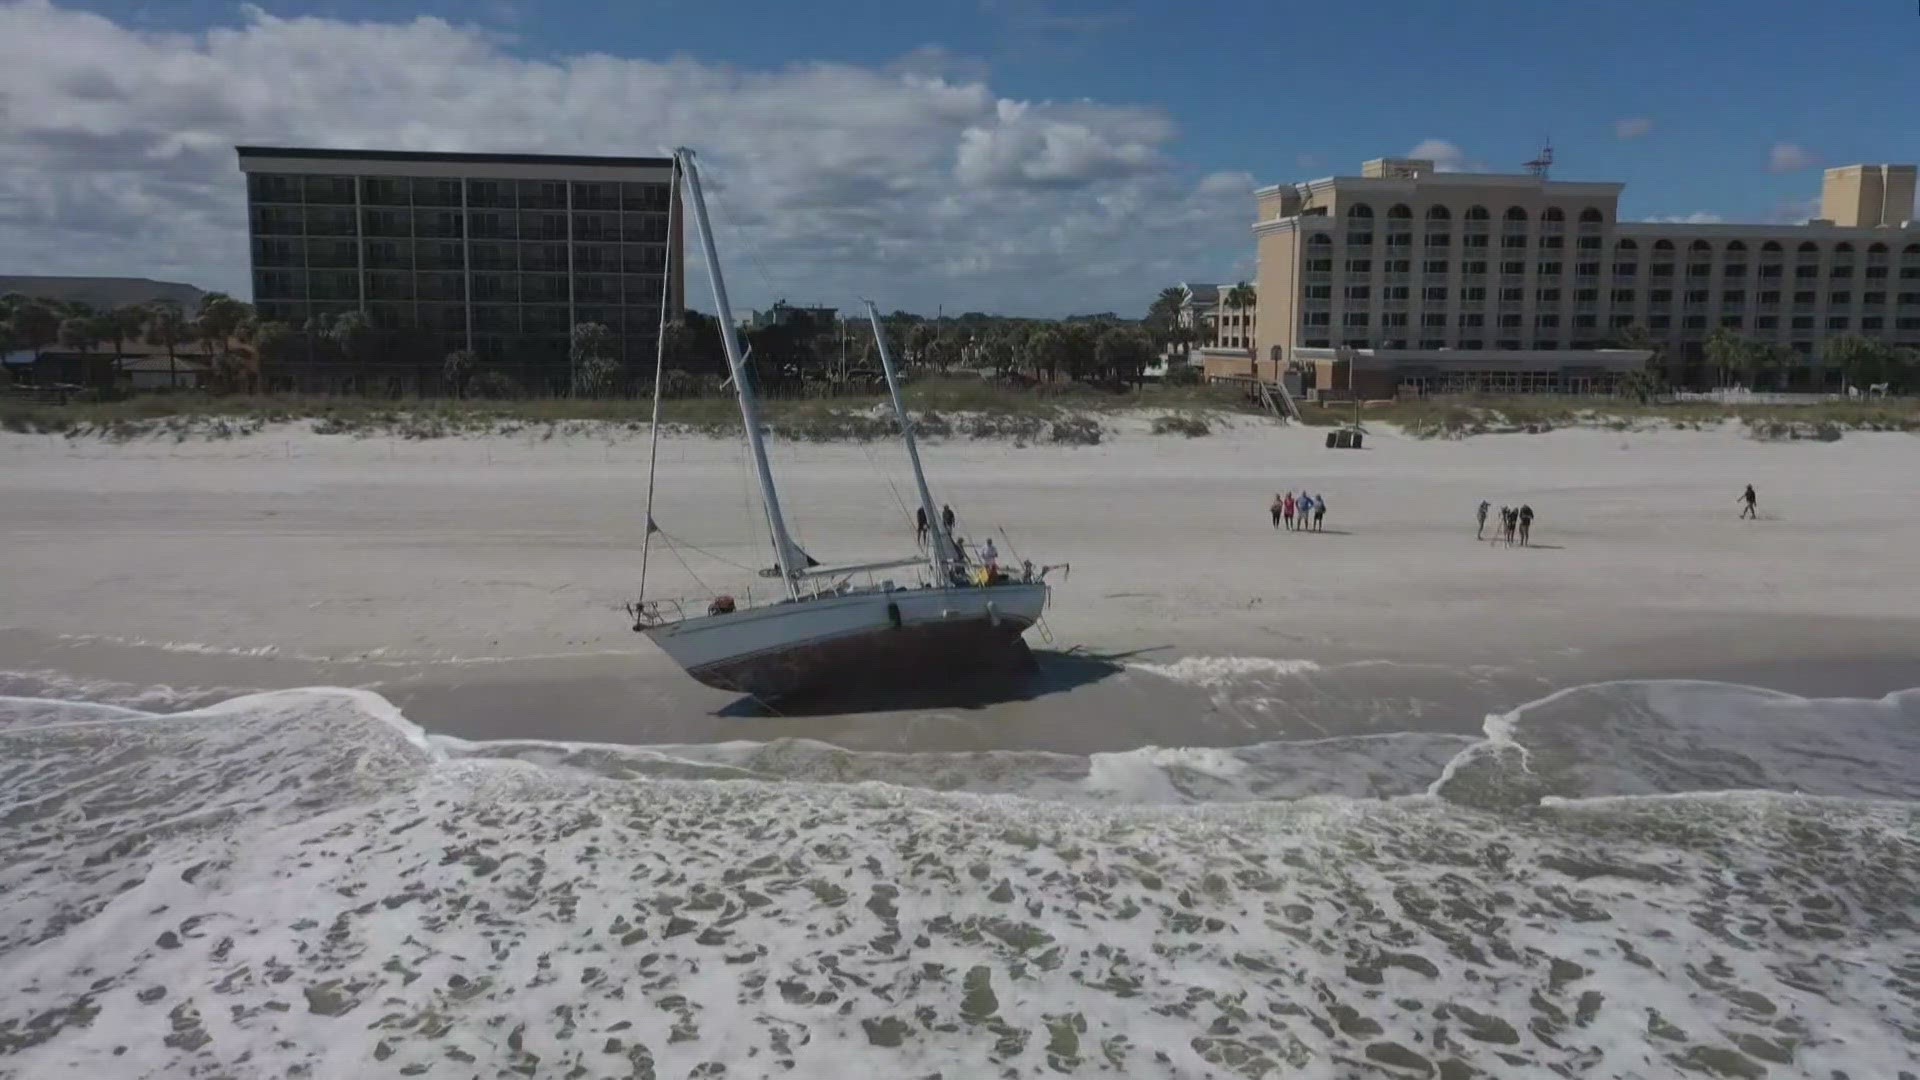 A captain and his sailboat are stranded on Jacksonville Beach after he says the vessel lost power, forcing him to swim to shore.